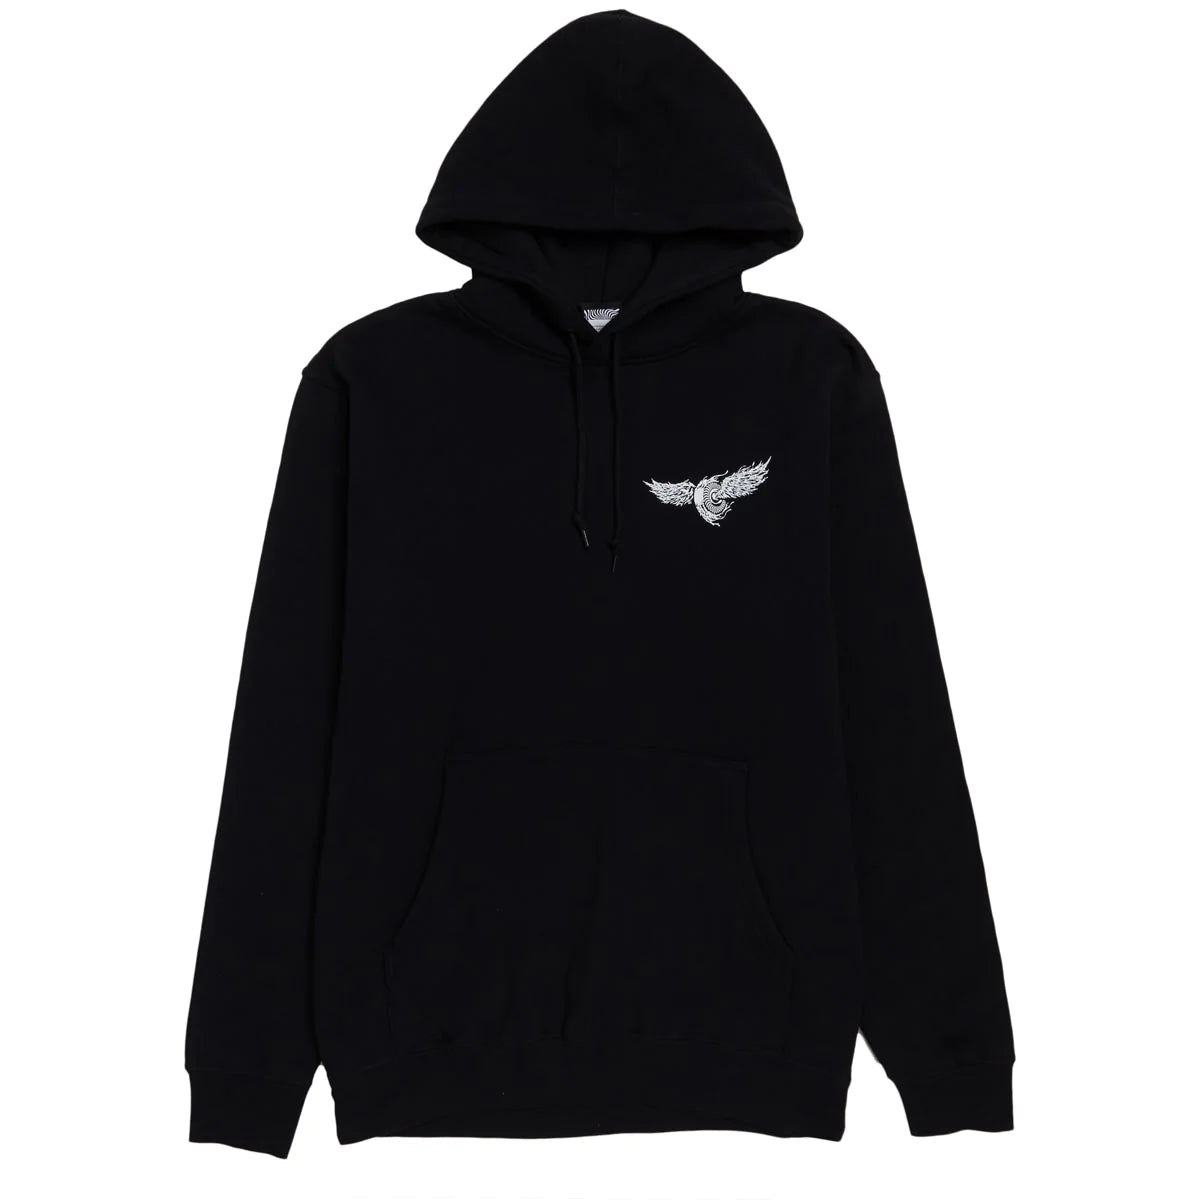 SPITFIRE DECAY FLYING CLASSIC HOODIE